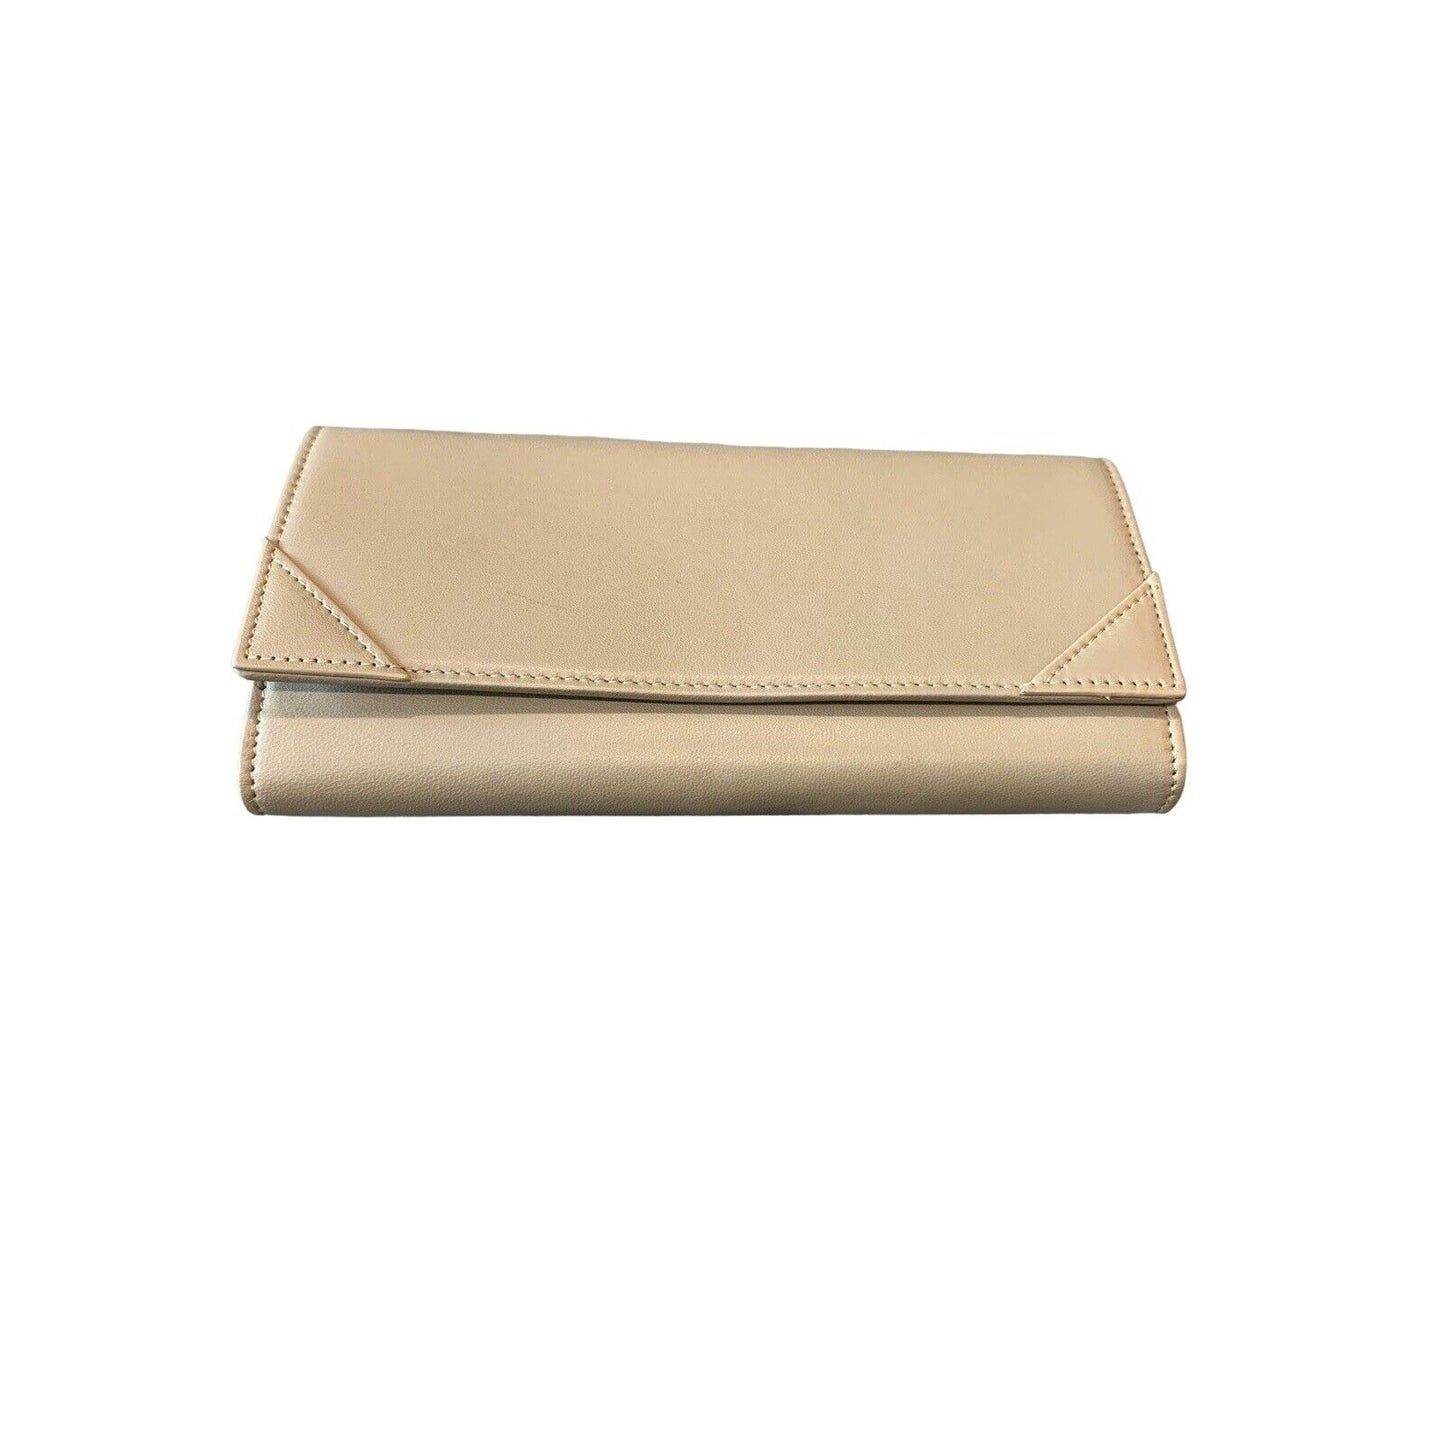 Canipelli Firenze Nappa Leather Classic Snap Envelop Style Wallet